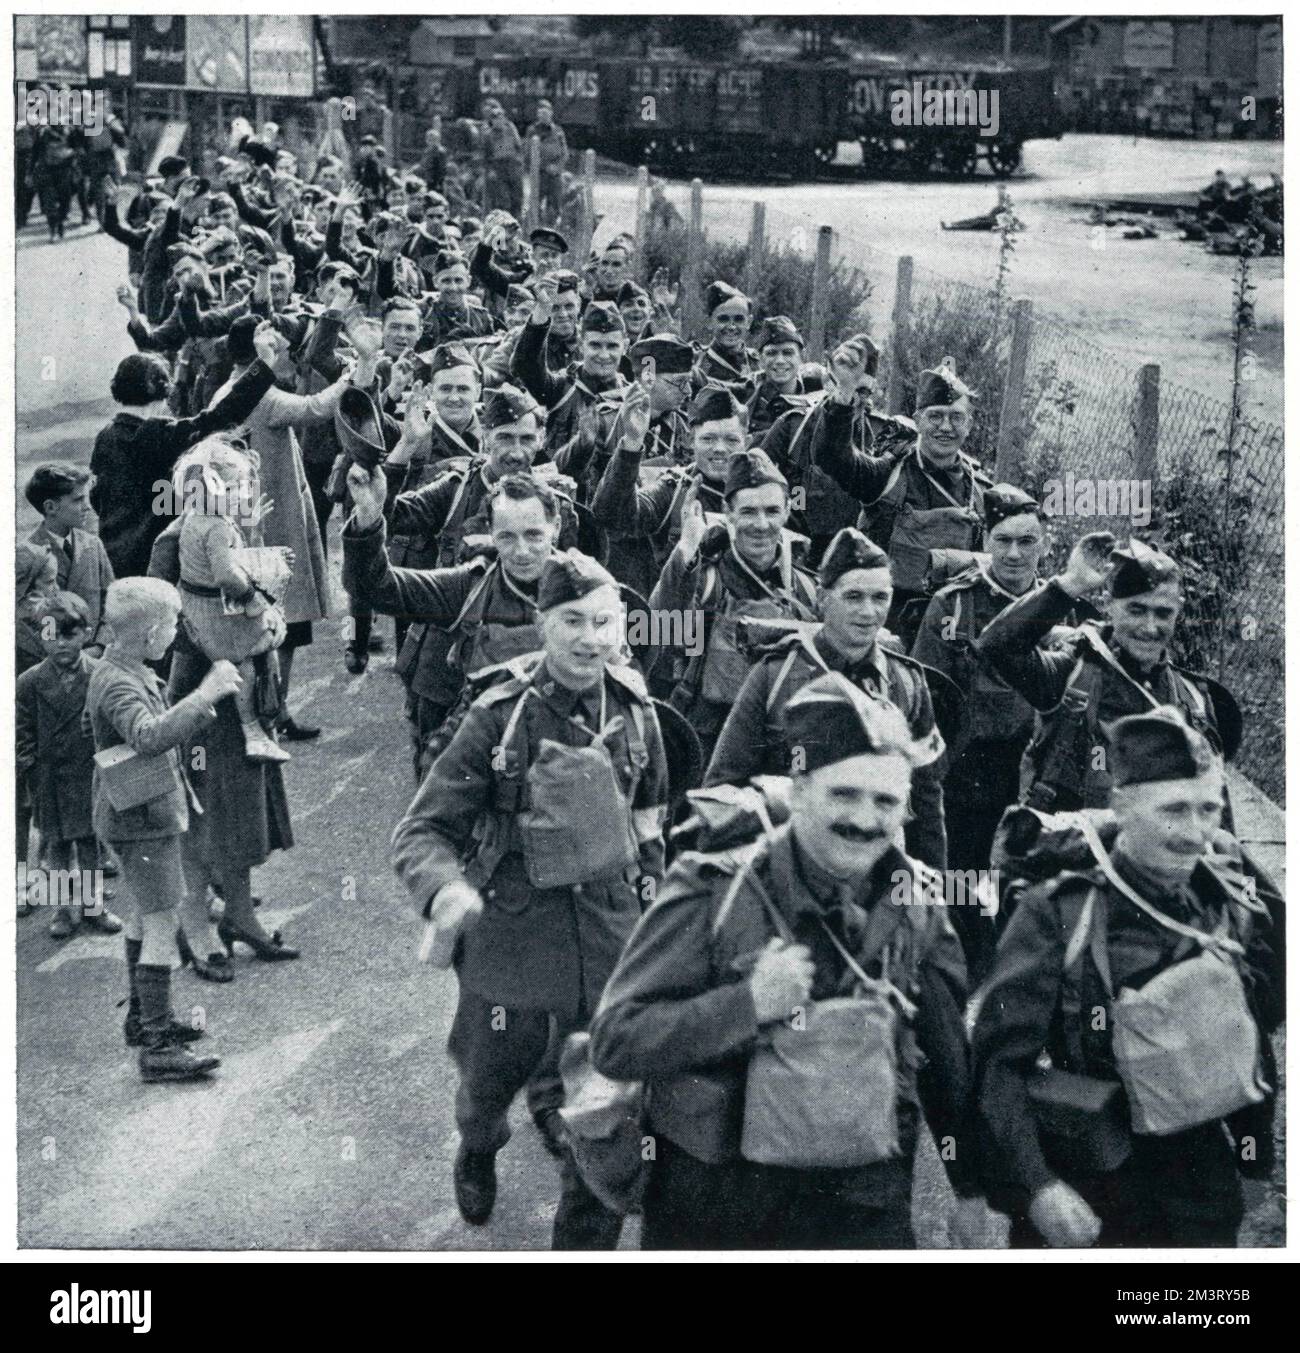 British soldiers photographed smiling as they leave their home for the Western Front, a few weeks into the Second World War. Women and children are shown waving as the men march through, some of whom raise their hats in salute.      Date: 1939 Stock Photo